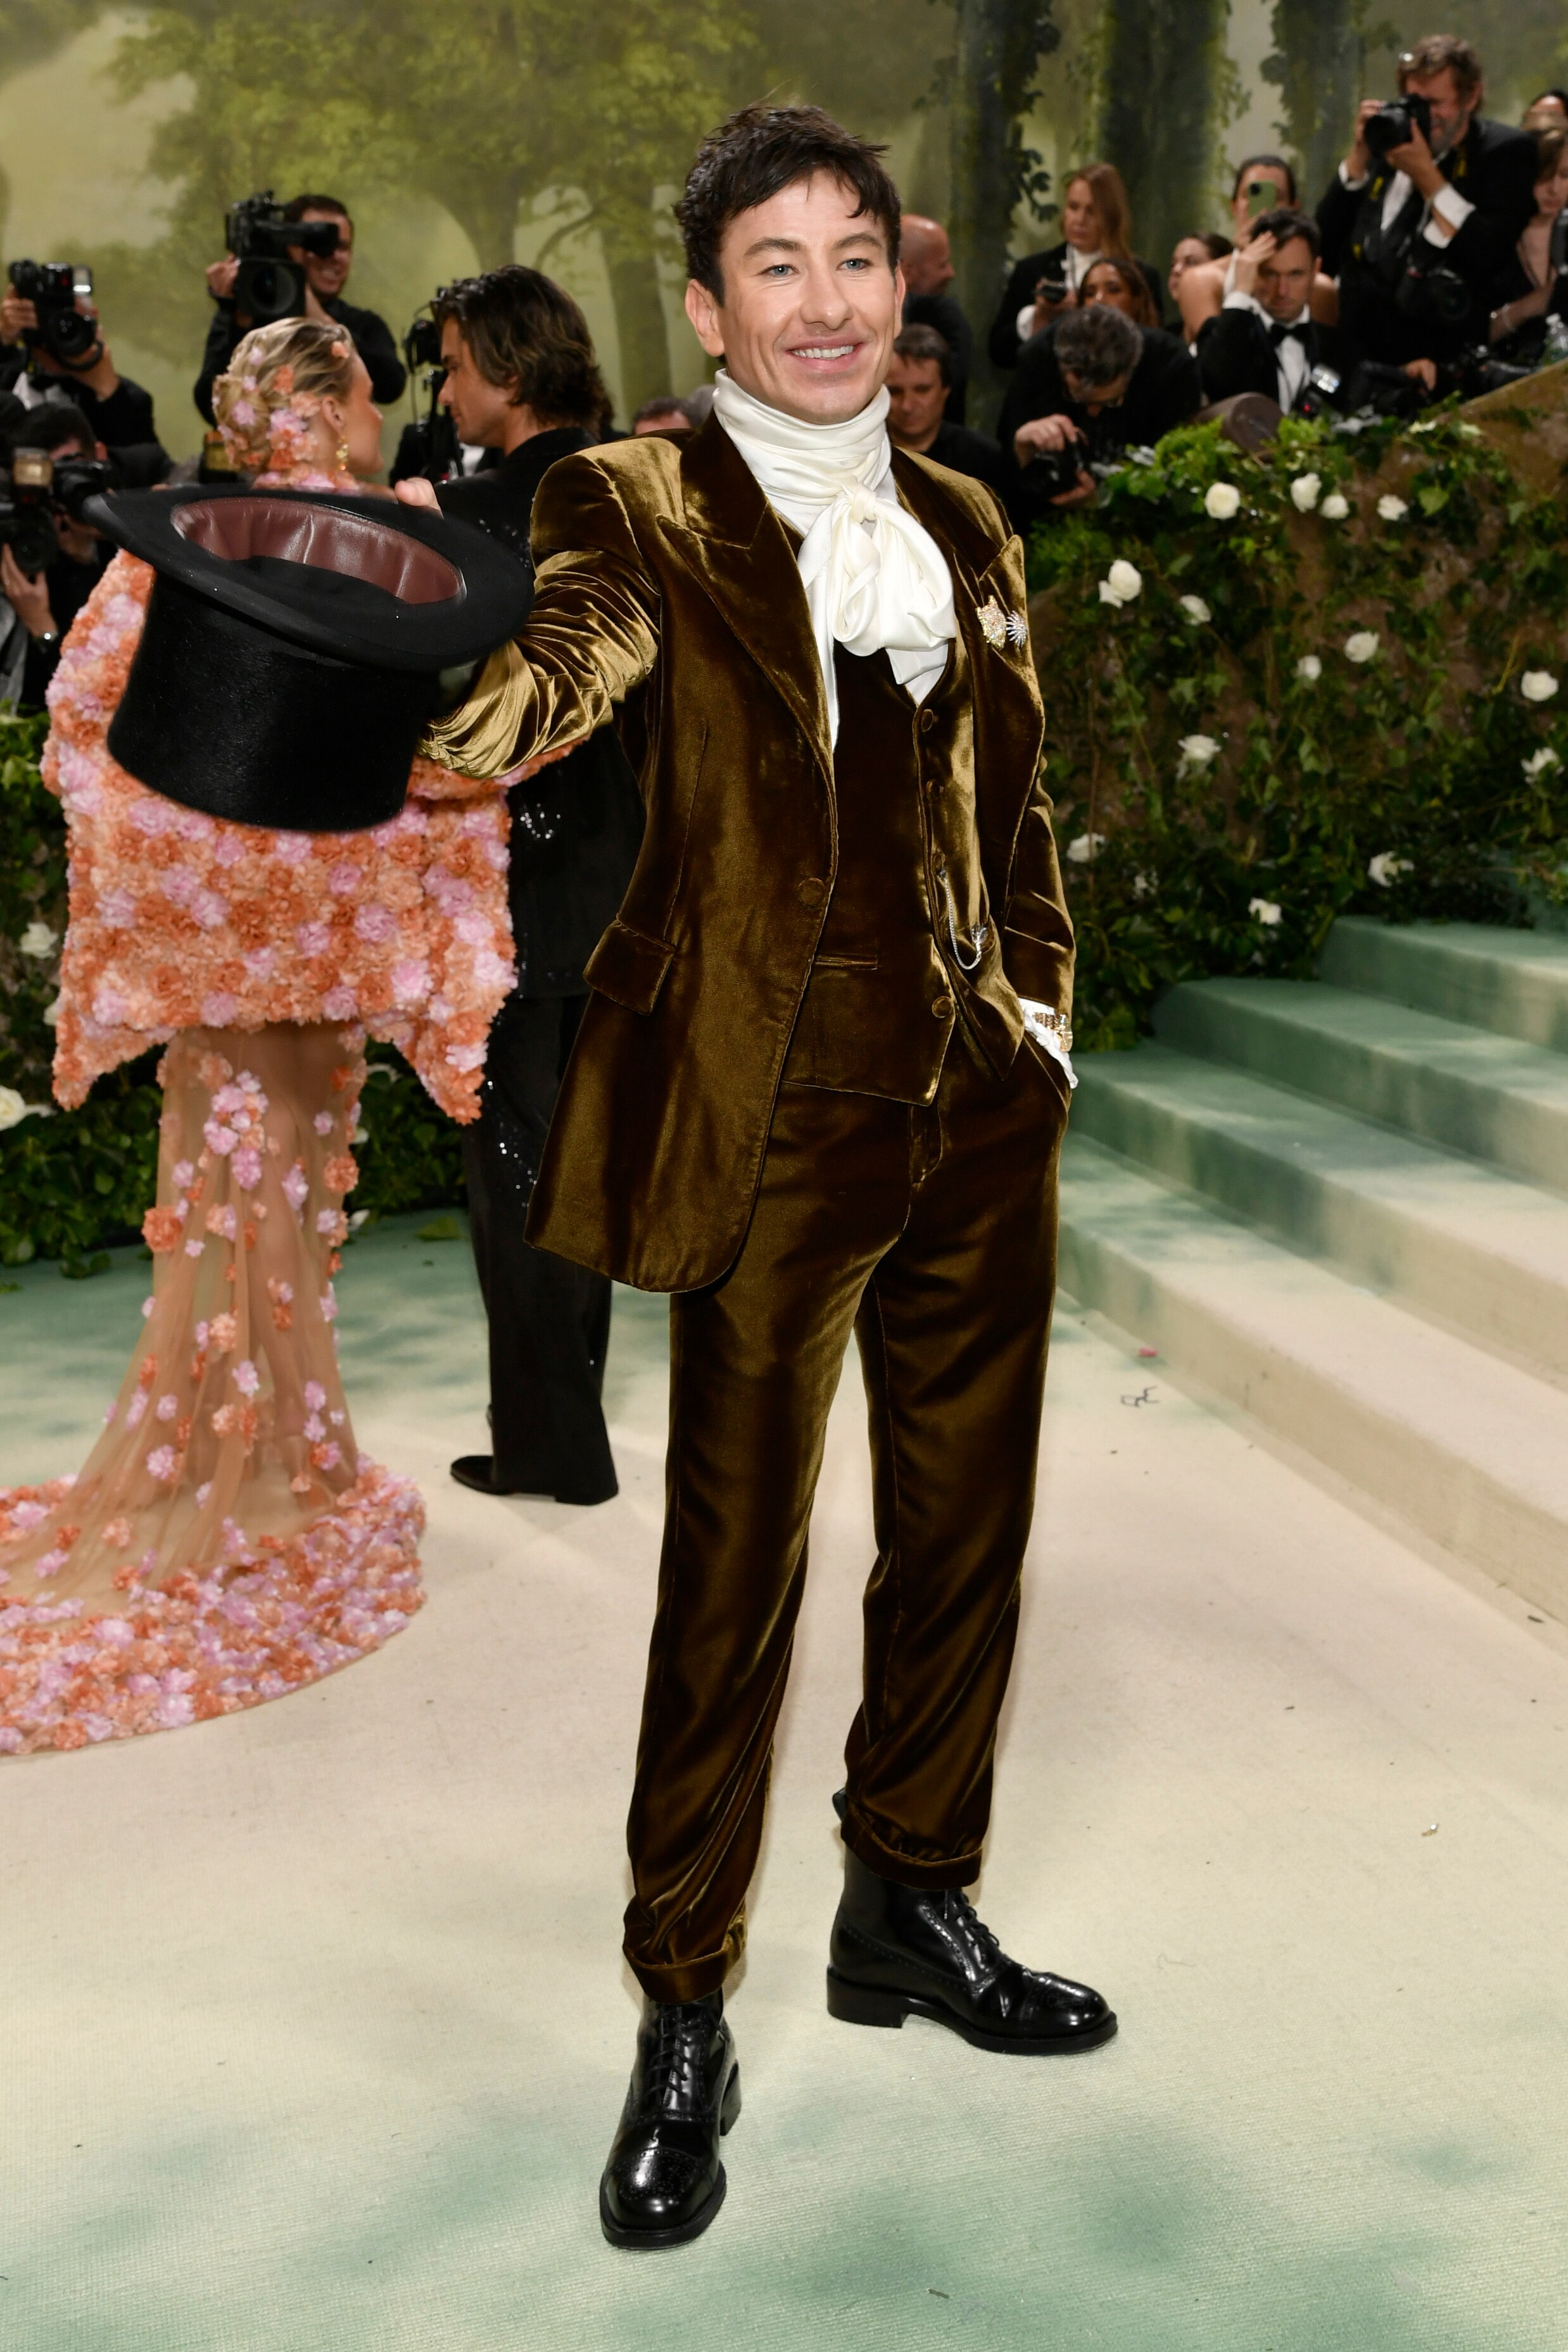 Barry Keoghan wearing a tan velvet suit with a white, ruffly scarf wrapped around his neck, holding a top hat.